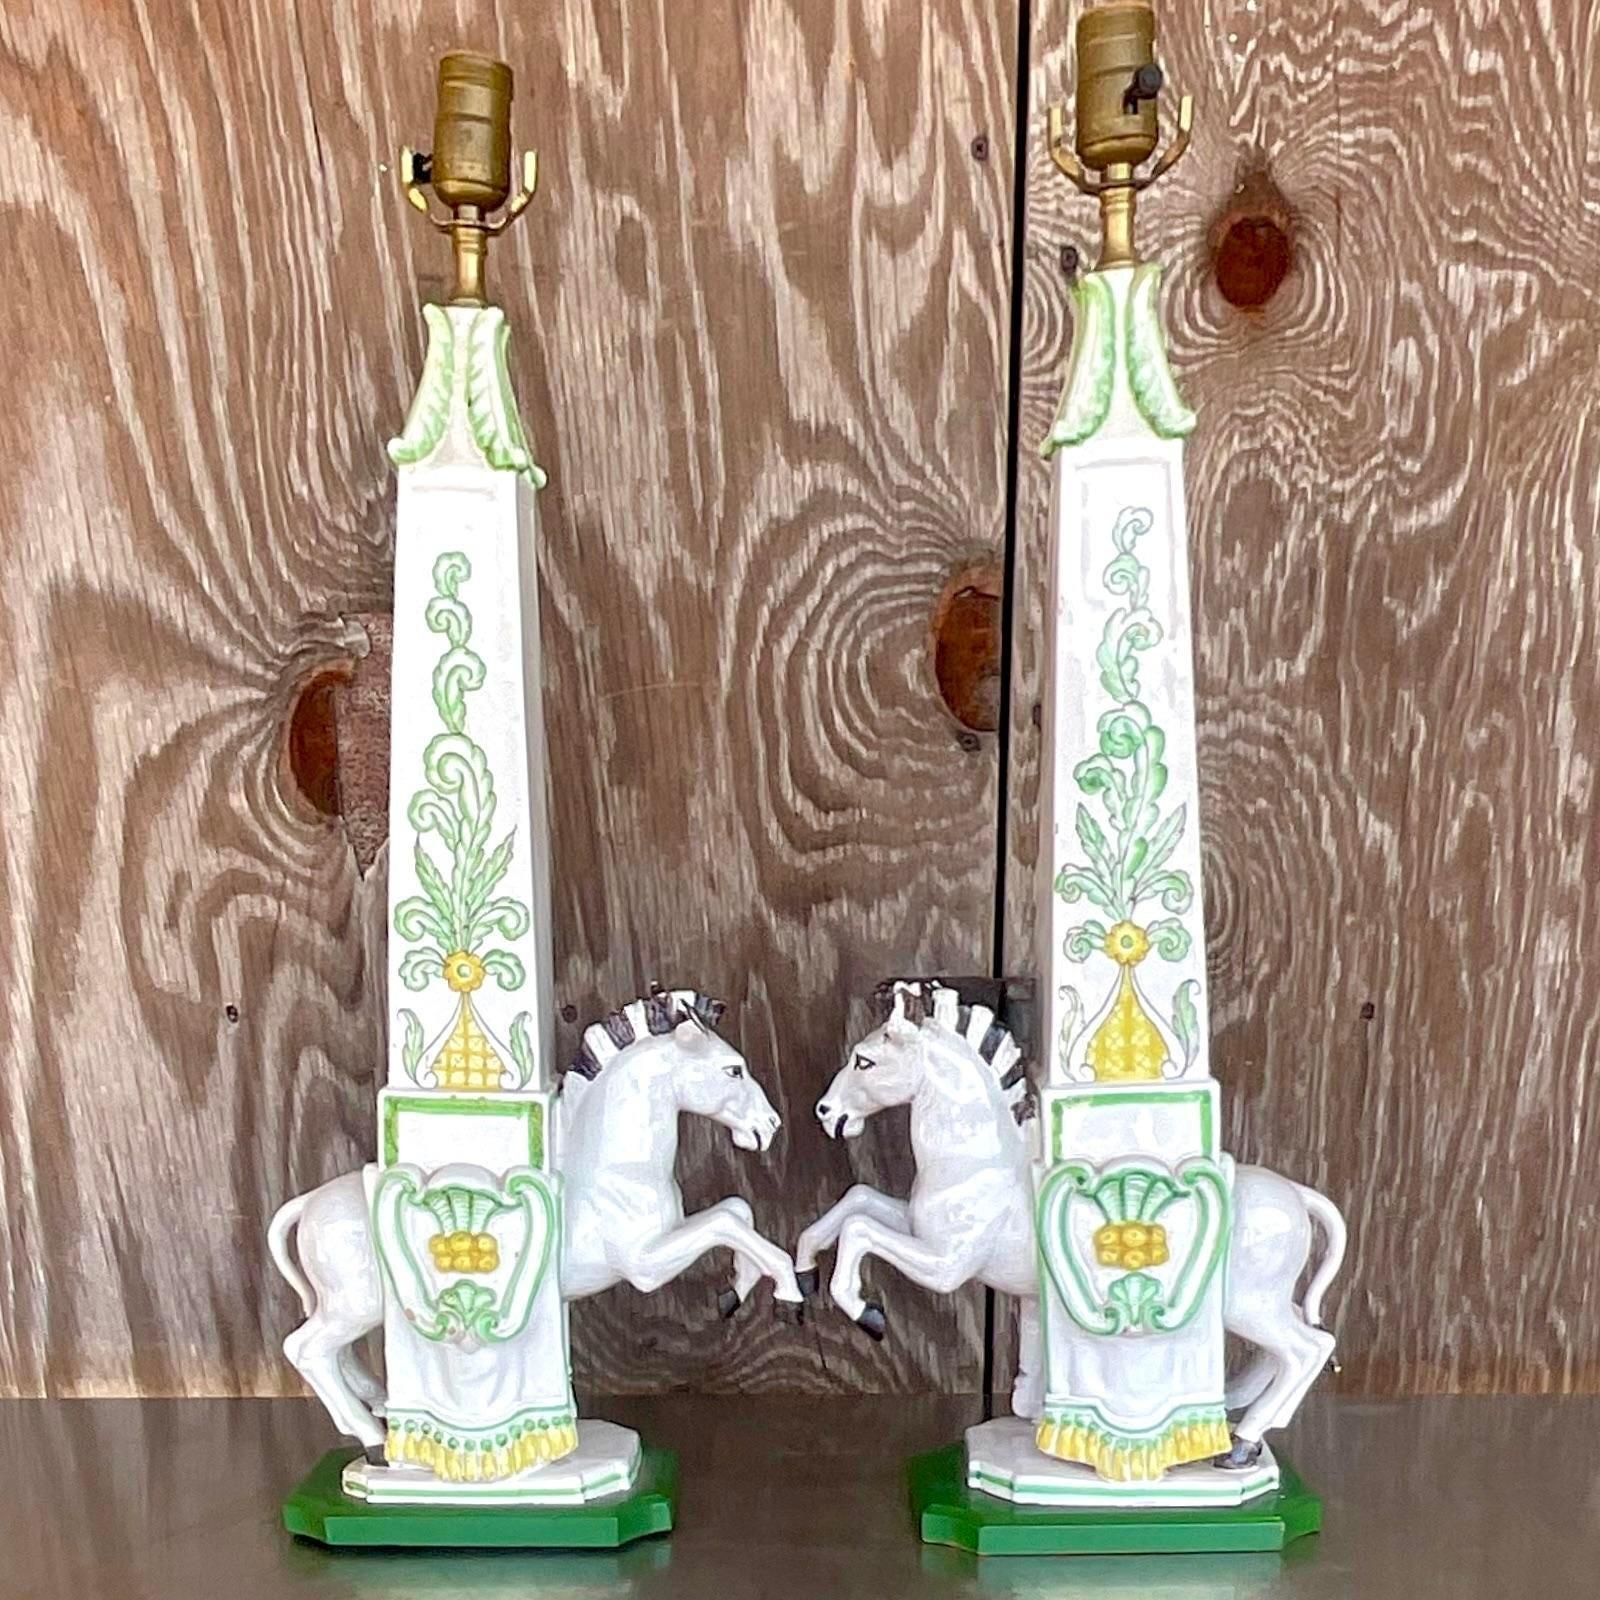 A fabulous pair of vintage Italian Regency table lamps. A charming pair of prancing zebras in an obelisk shaped frame. Hand painted detail in green and yellow. Acquired from a Palm Beach estate.